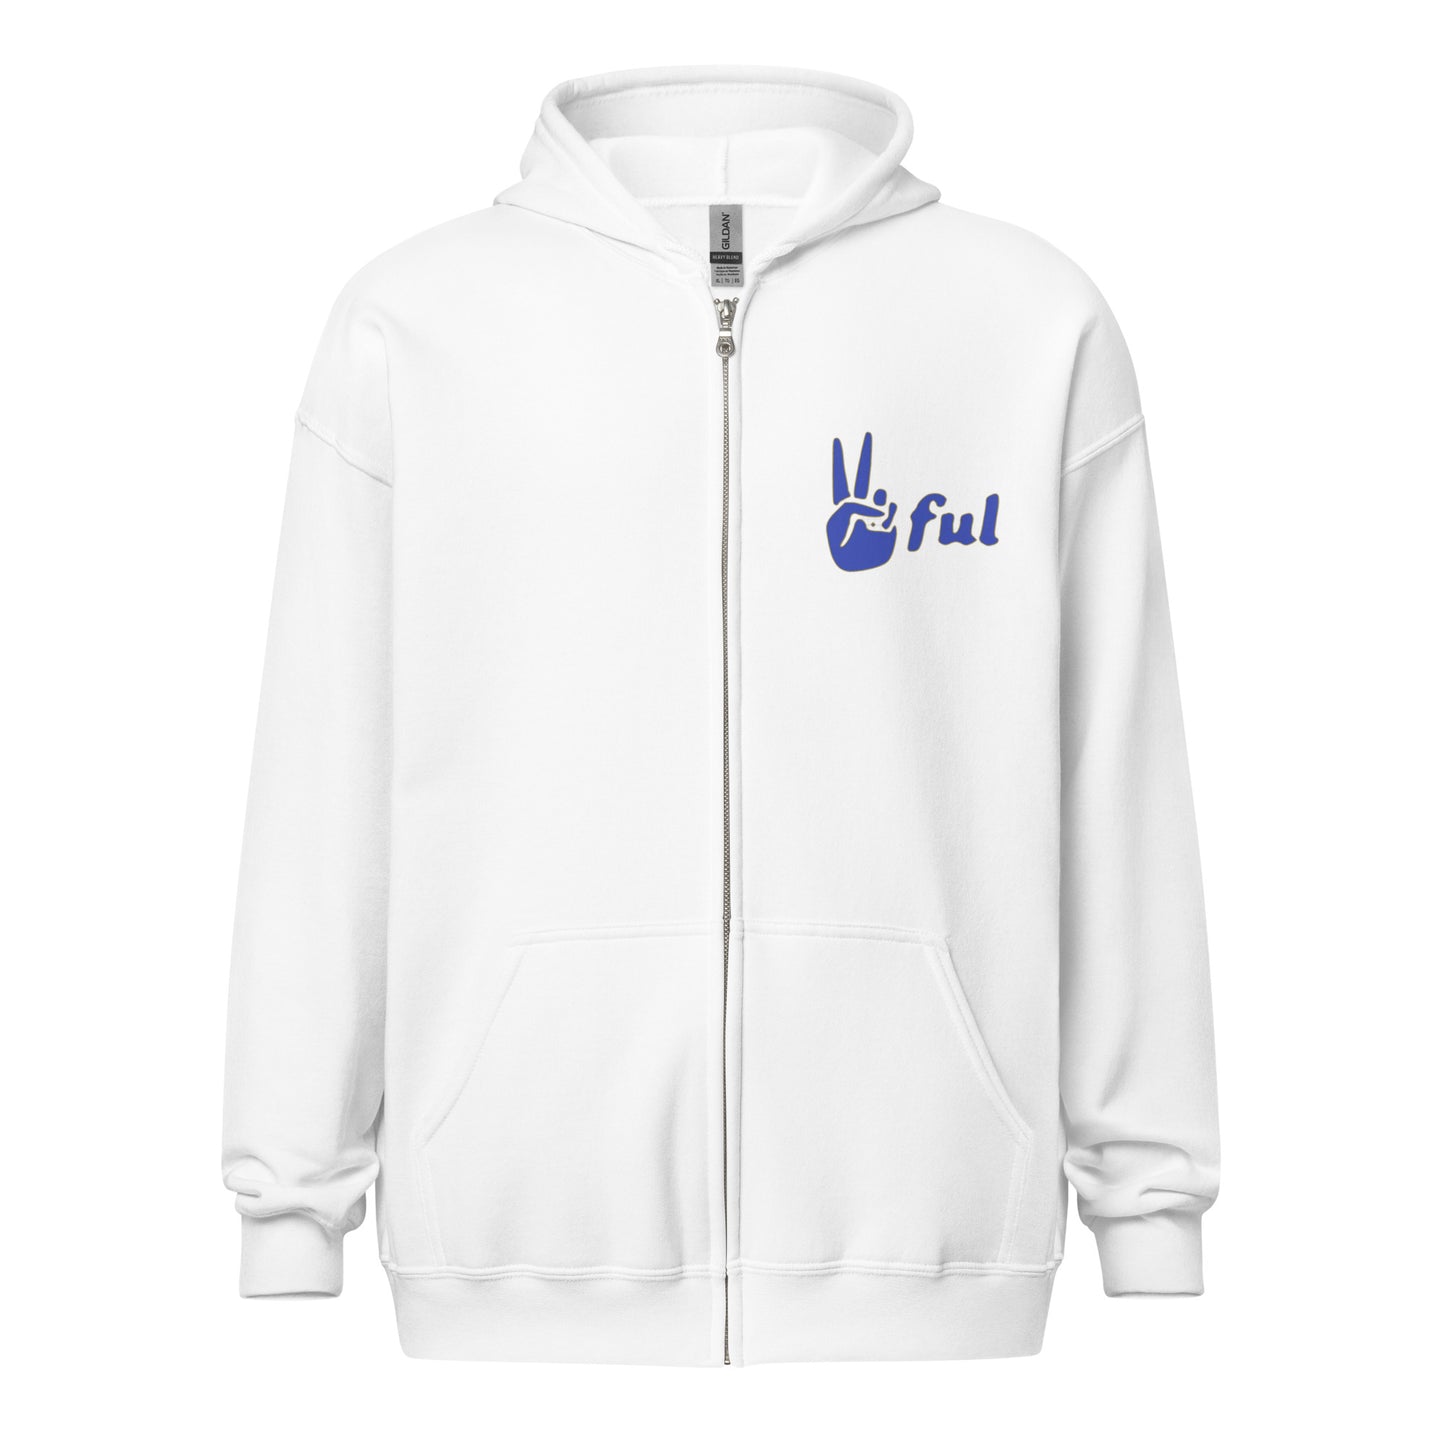 White and Blue Peaceful Zip up Hoodie